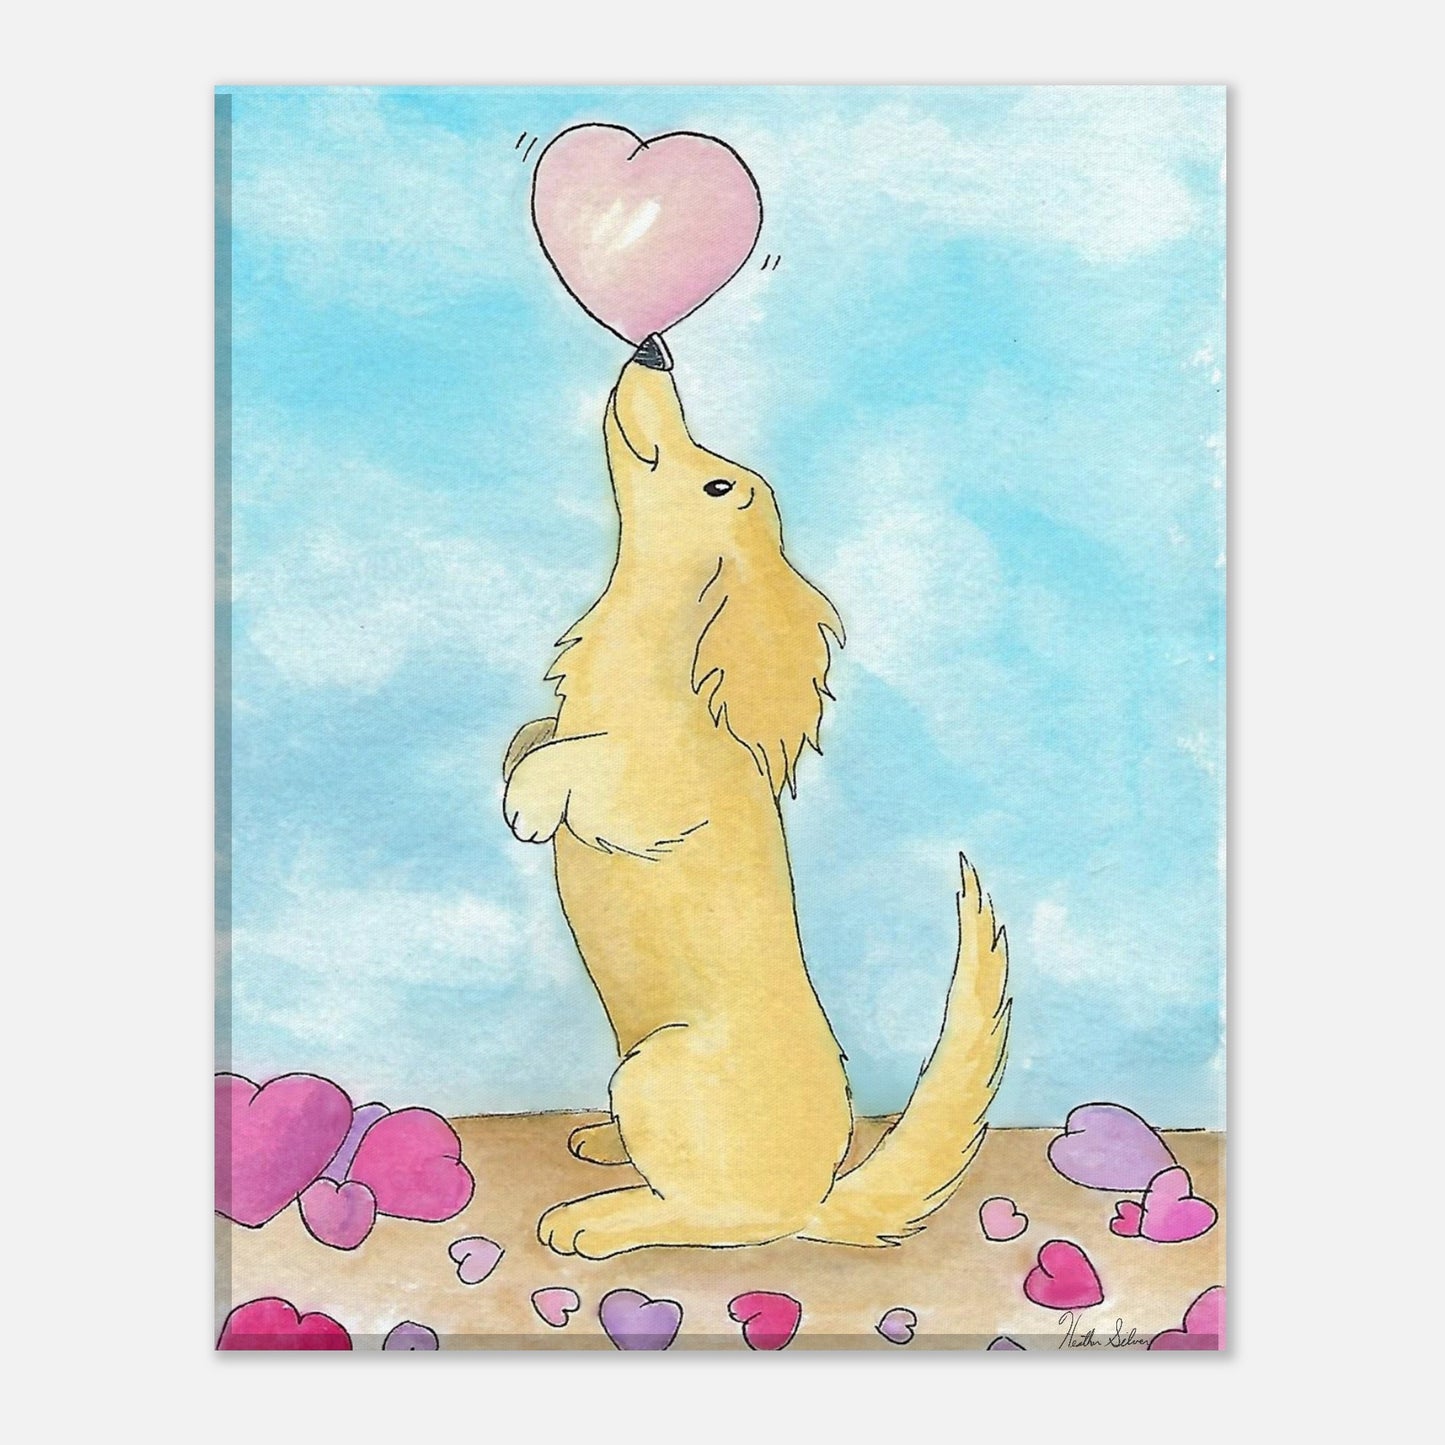 11 by 14 inch canvas wall art print of Heather Silver's watercolor painting, Puppy Love. It features a cute dog balancing a pink heart on its nose against a blue sky background.